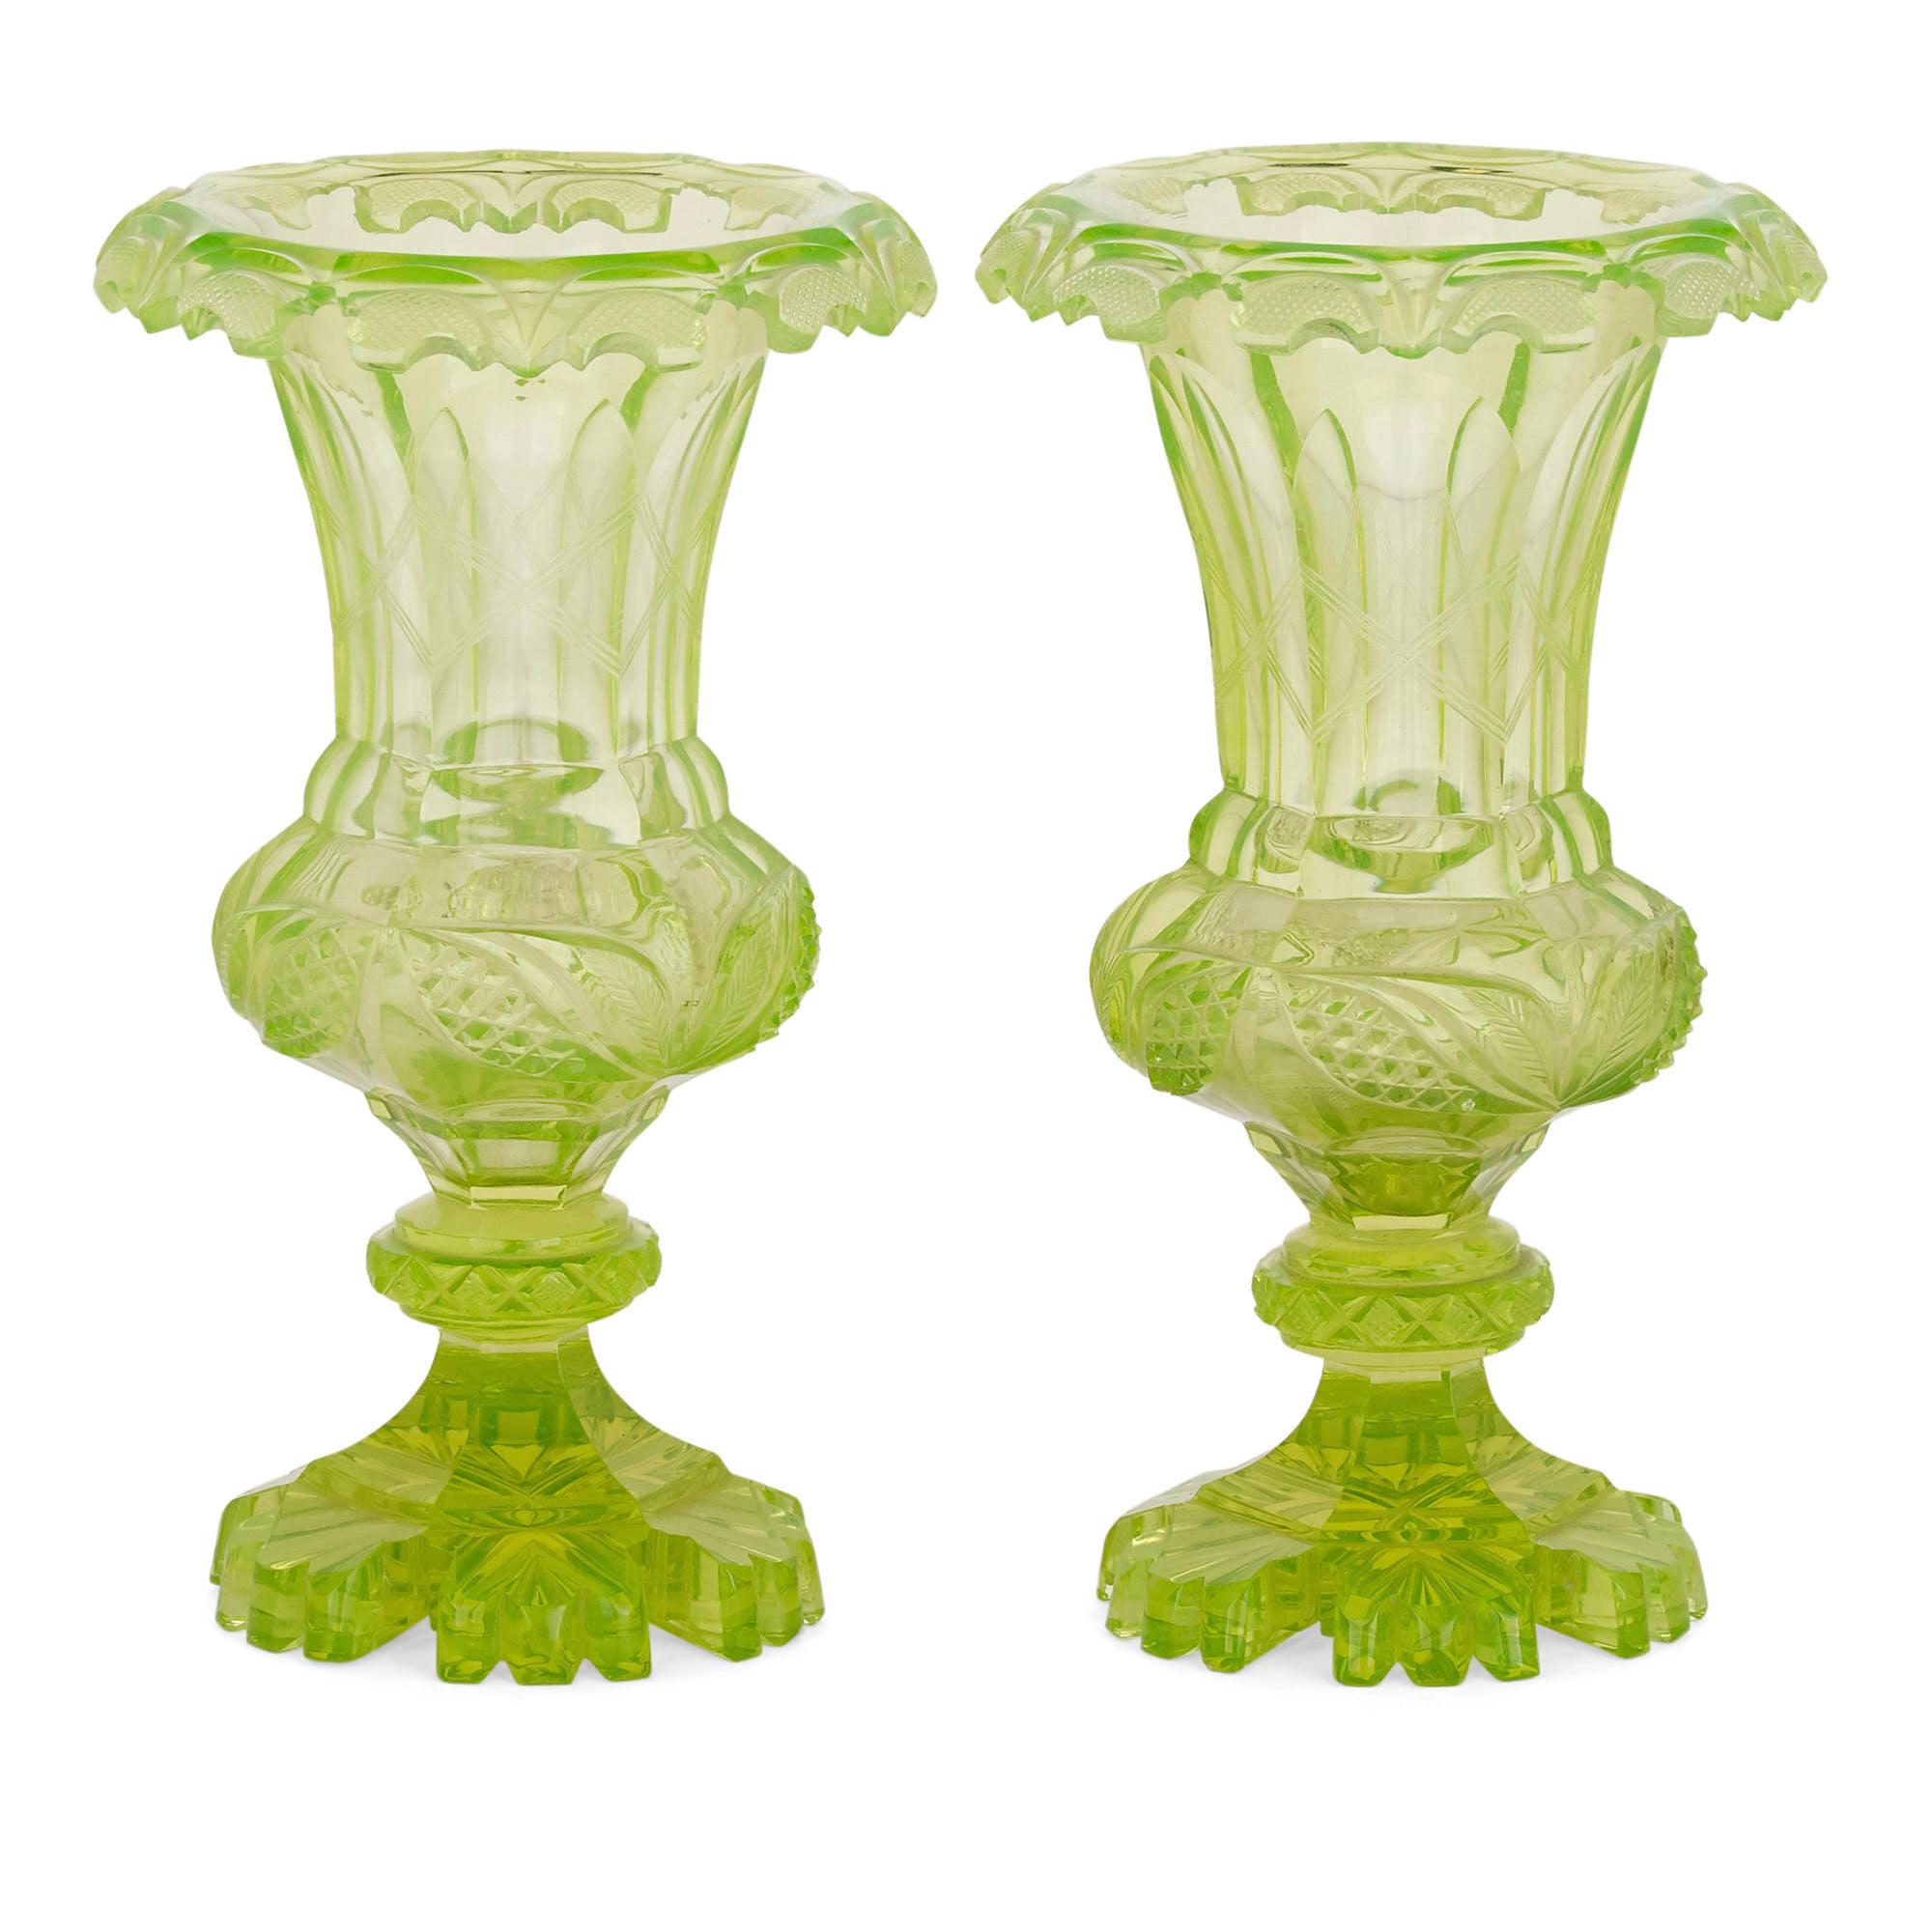 Pair of antique 19th century bohemian green cut glass vases
Bohemian, circa 1870
Dimensions: Height 23cm, diameter 13cm

Cut from uranium glass, this vibrant pair of green Bohemian vases are designed in the style of a campana vase. They feature